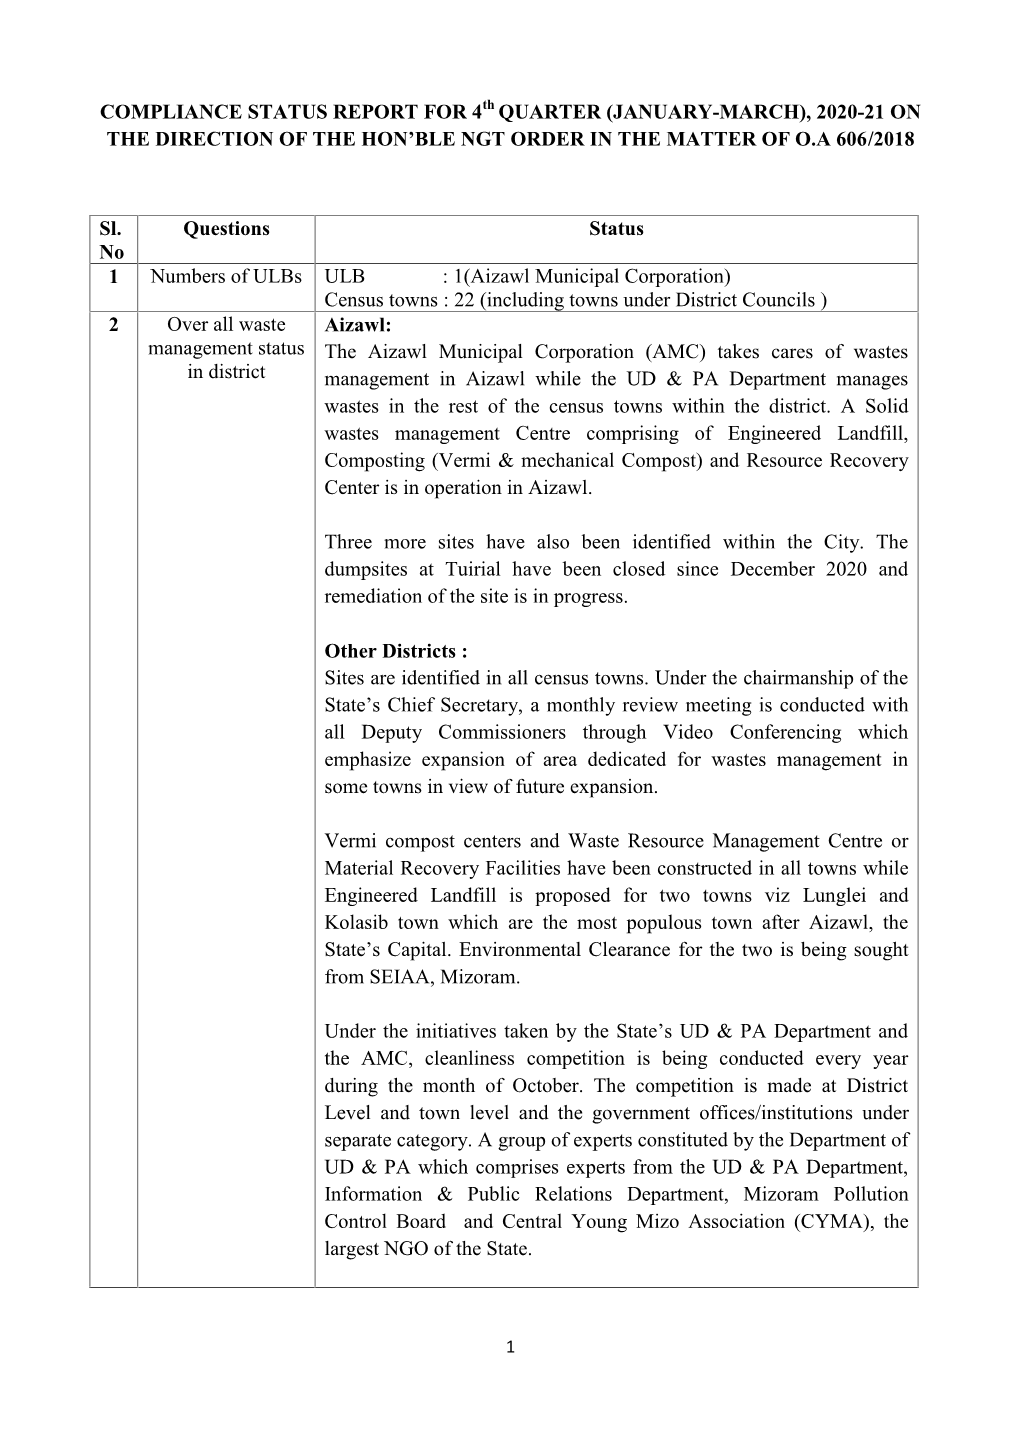 COMPLIANCE STATUS REPORT for 4Th QUARTER (JANUARY-MARCH), 2020-21 on the DIRECTION of the HON’BLE NGT ORDER in the MATTER of O.A 606/2018